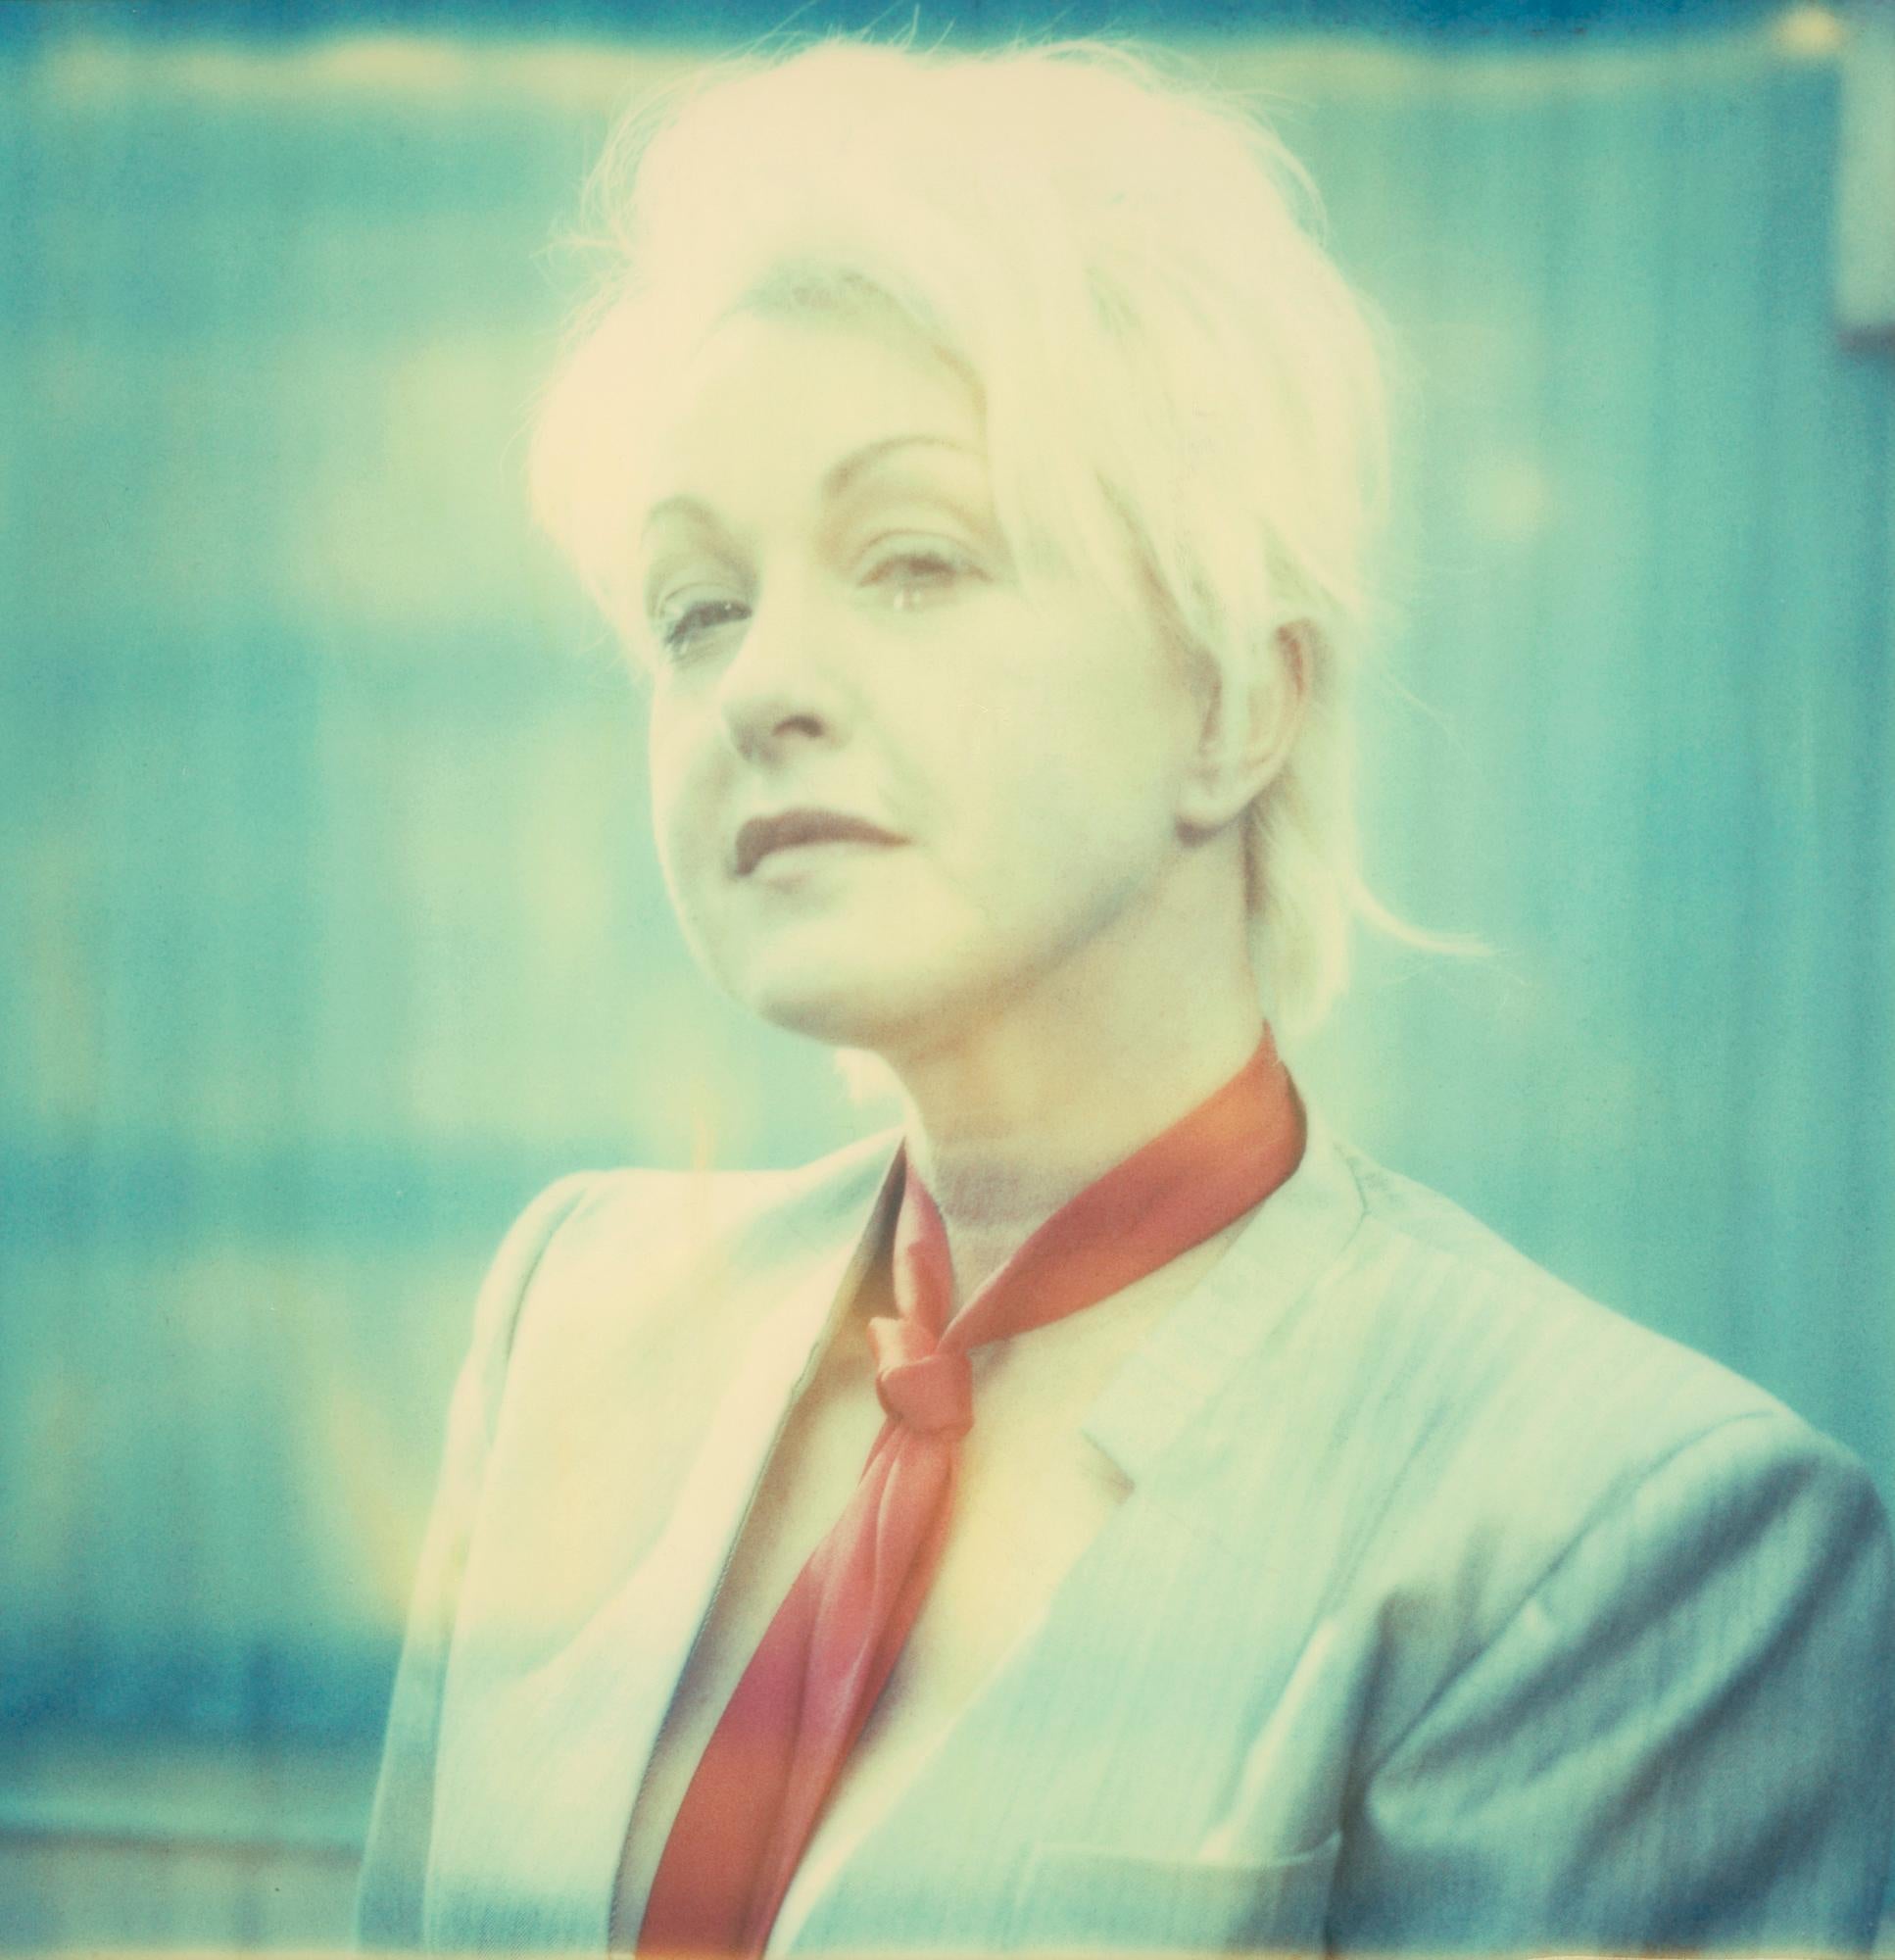 Stefanie Schneider Color Photograph - Untitled 01 (Cyndi Lauper) - record cover shoot